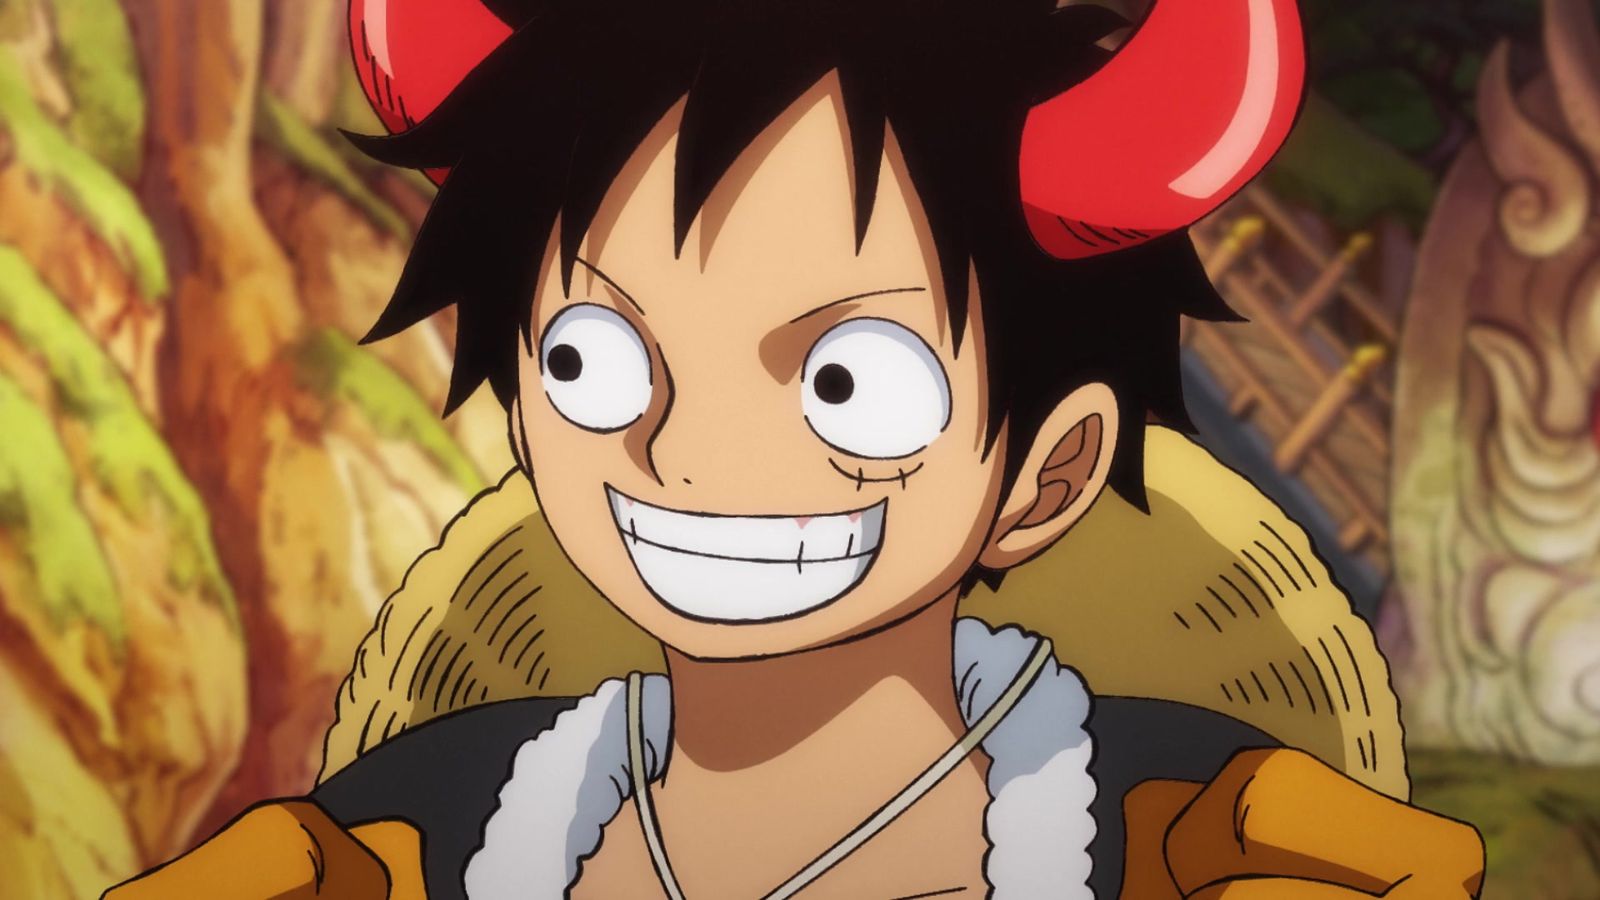 One Piece Reveals Volume 104 Cover, Gives Clear Look at Luffy in Gear ...